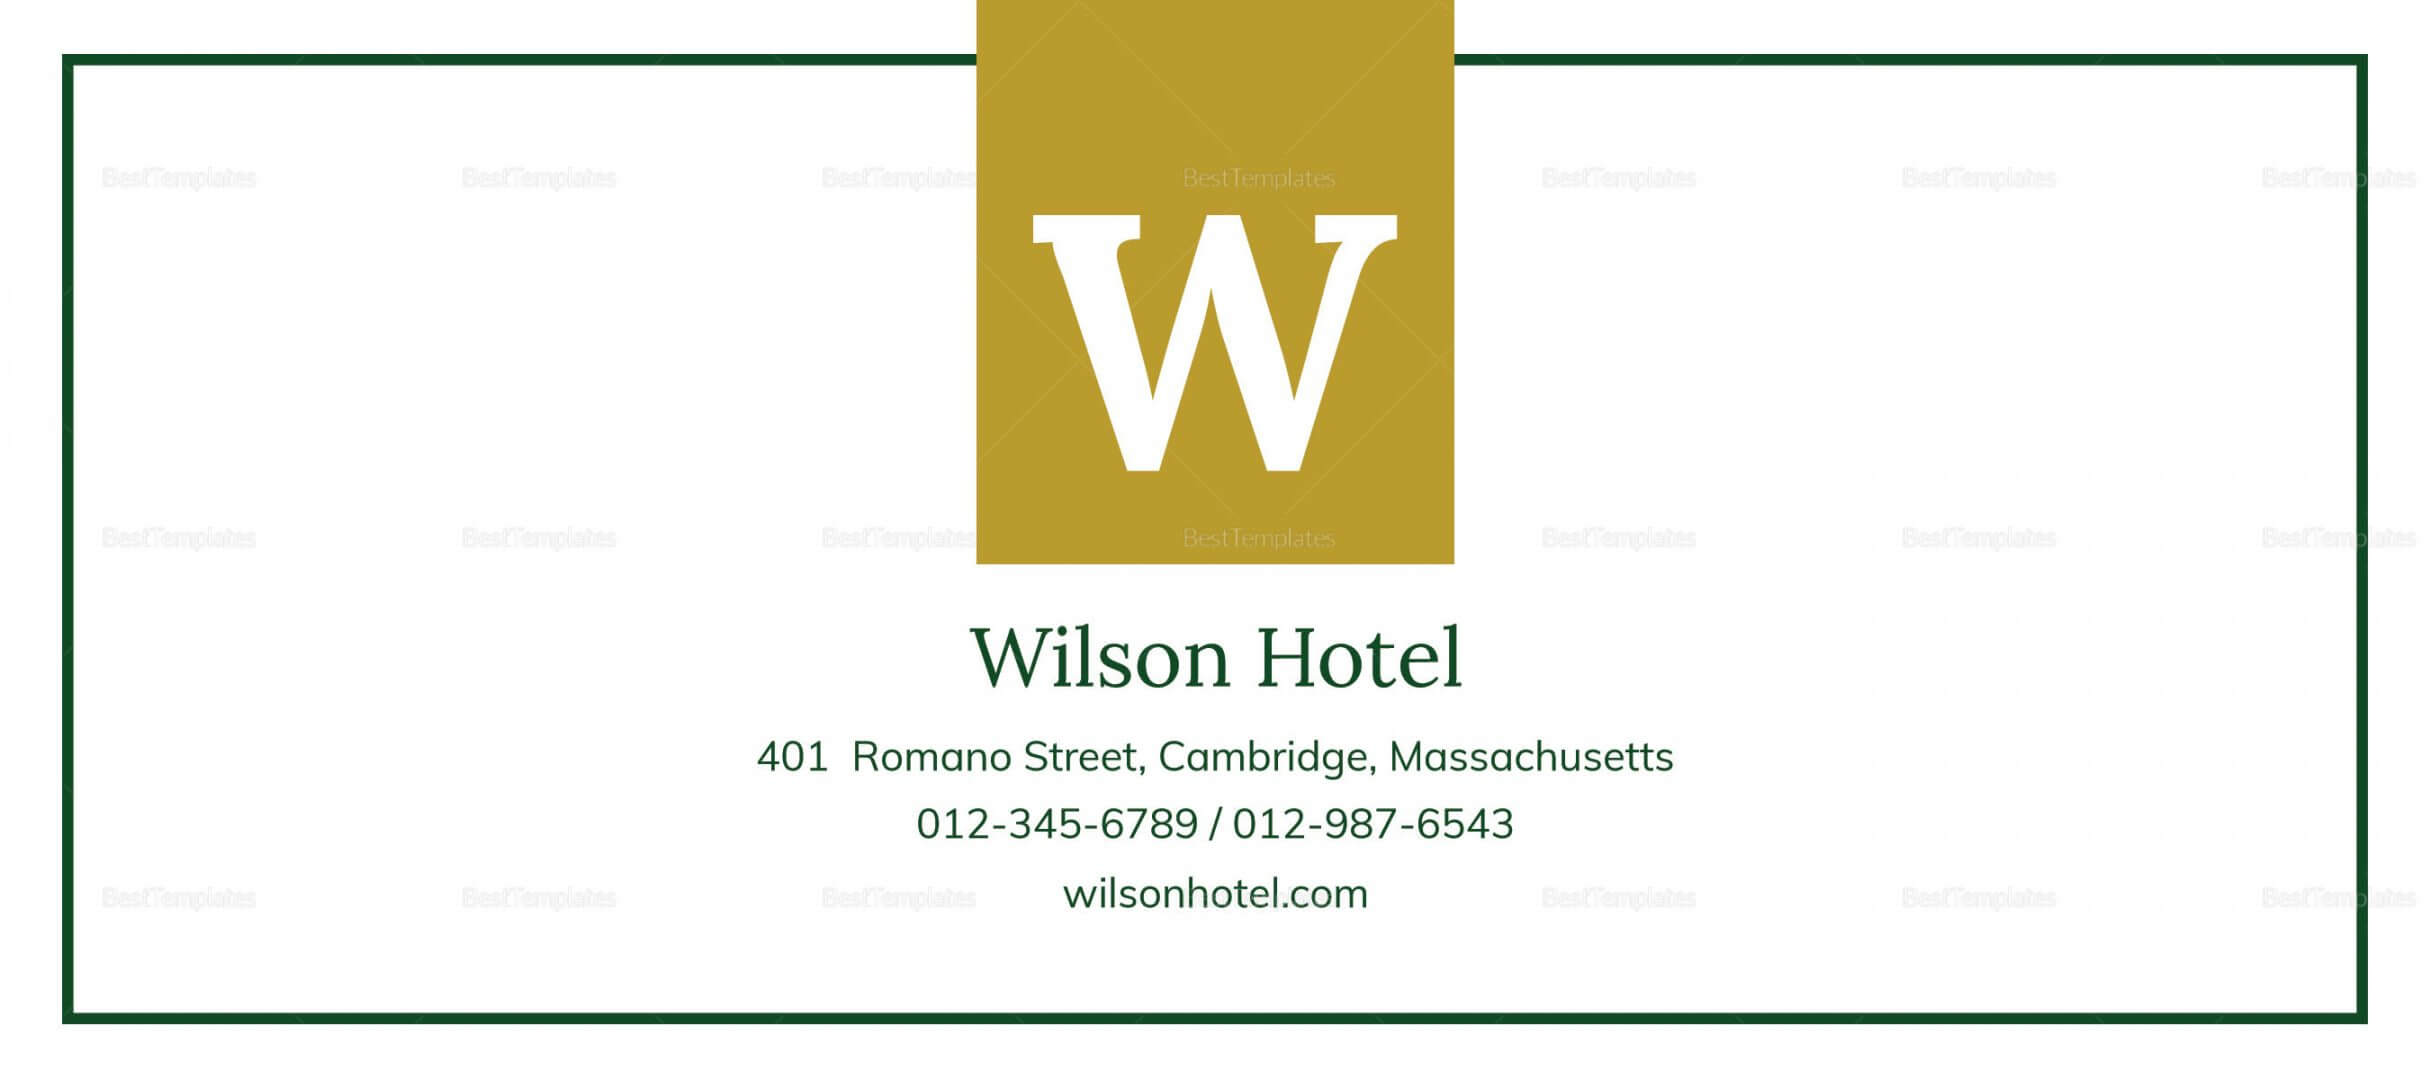 Free Hotel Gift Certificate Design Template In Psd Word Throughout Publisher Gift Certificate Template